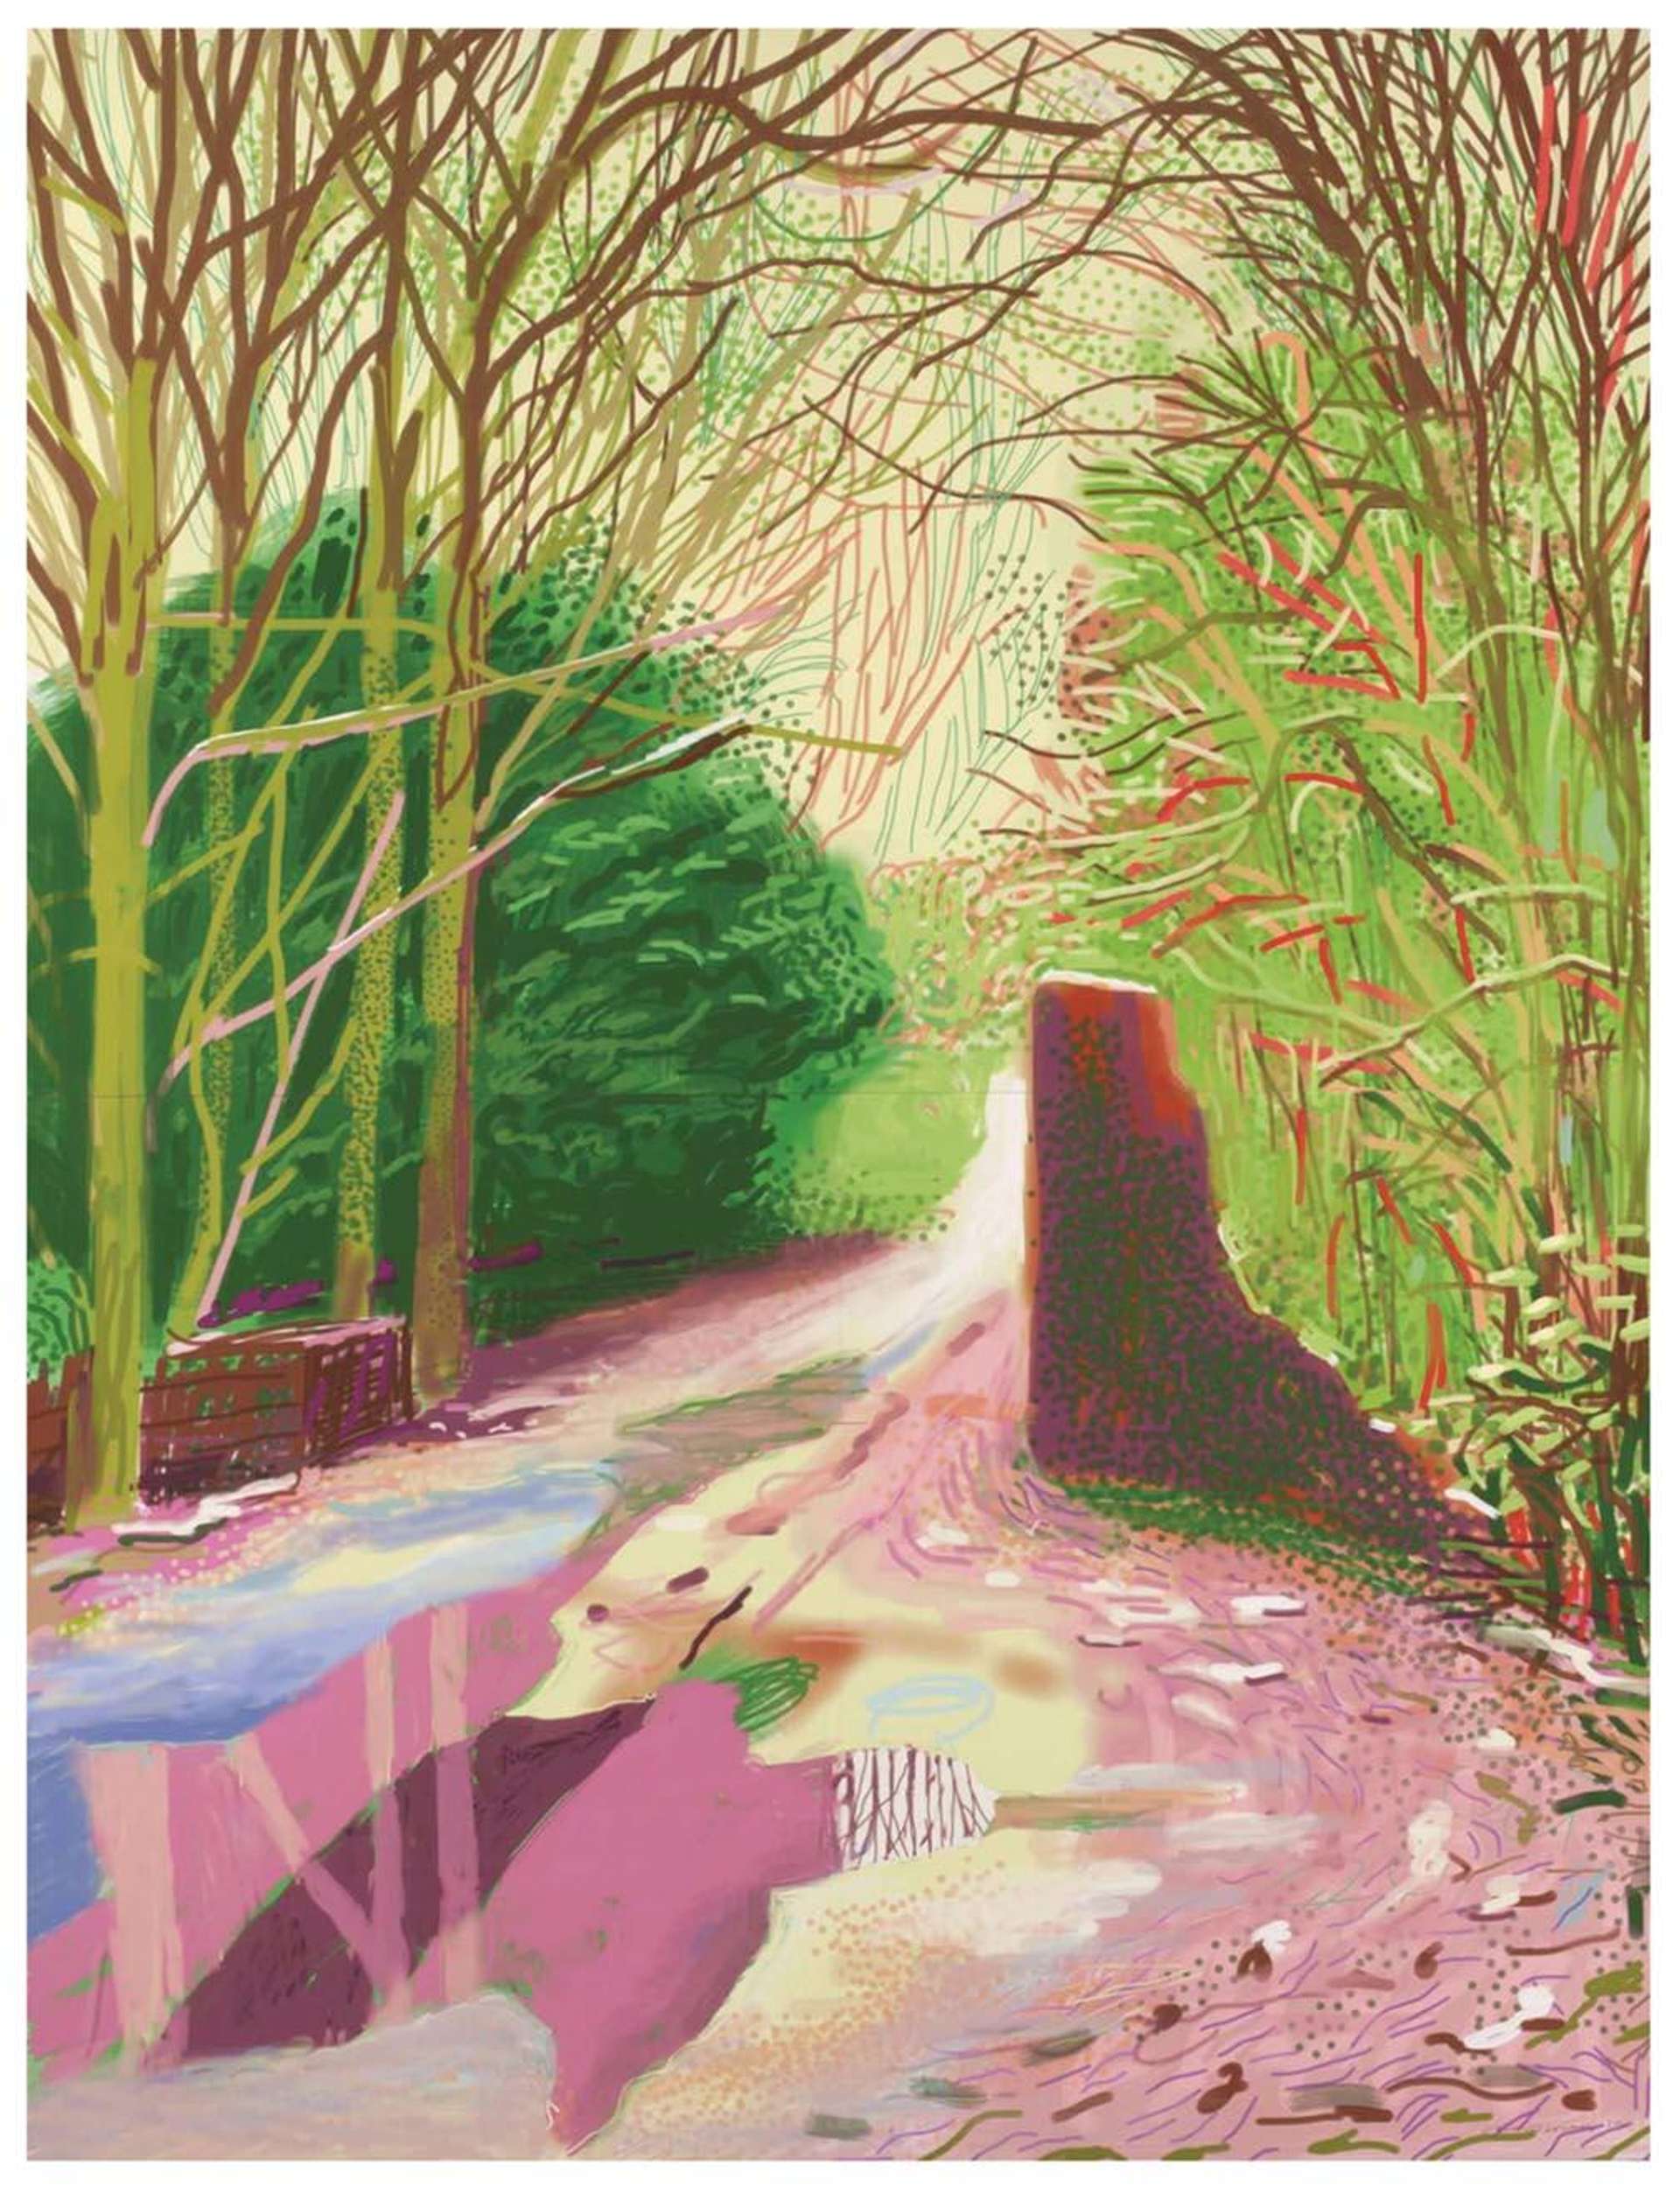 An iPad drawing by David Hockney depicting a flooded country road, the ground and water puddly in hues of pink, with green trees receding towards the vanishing point.